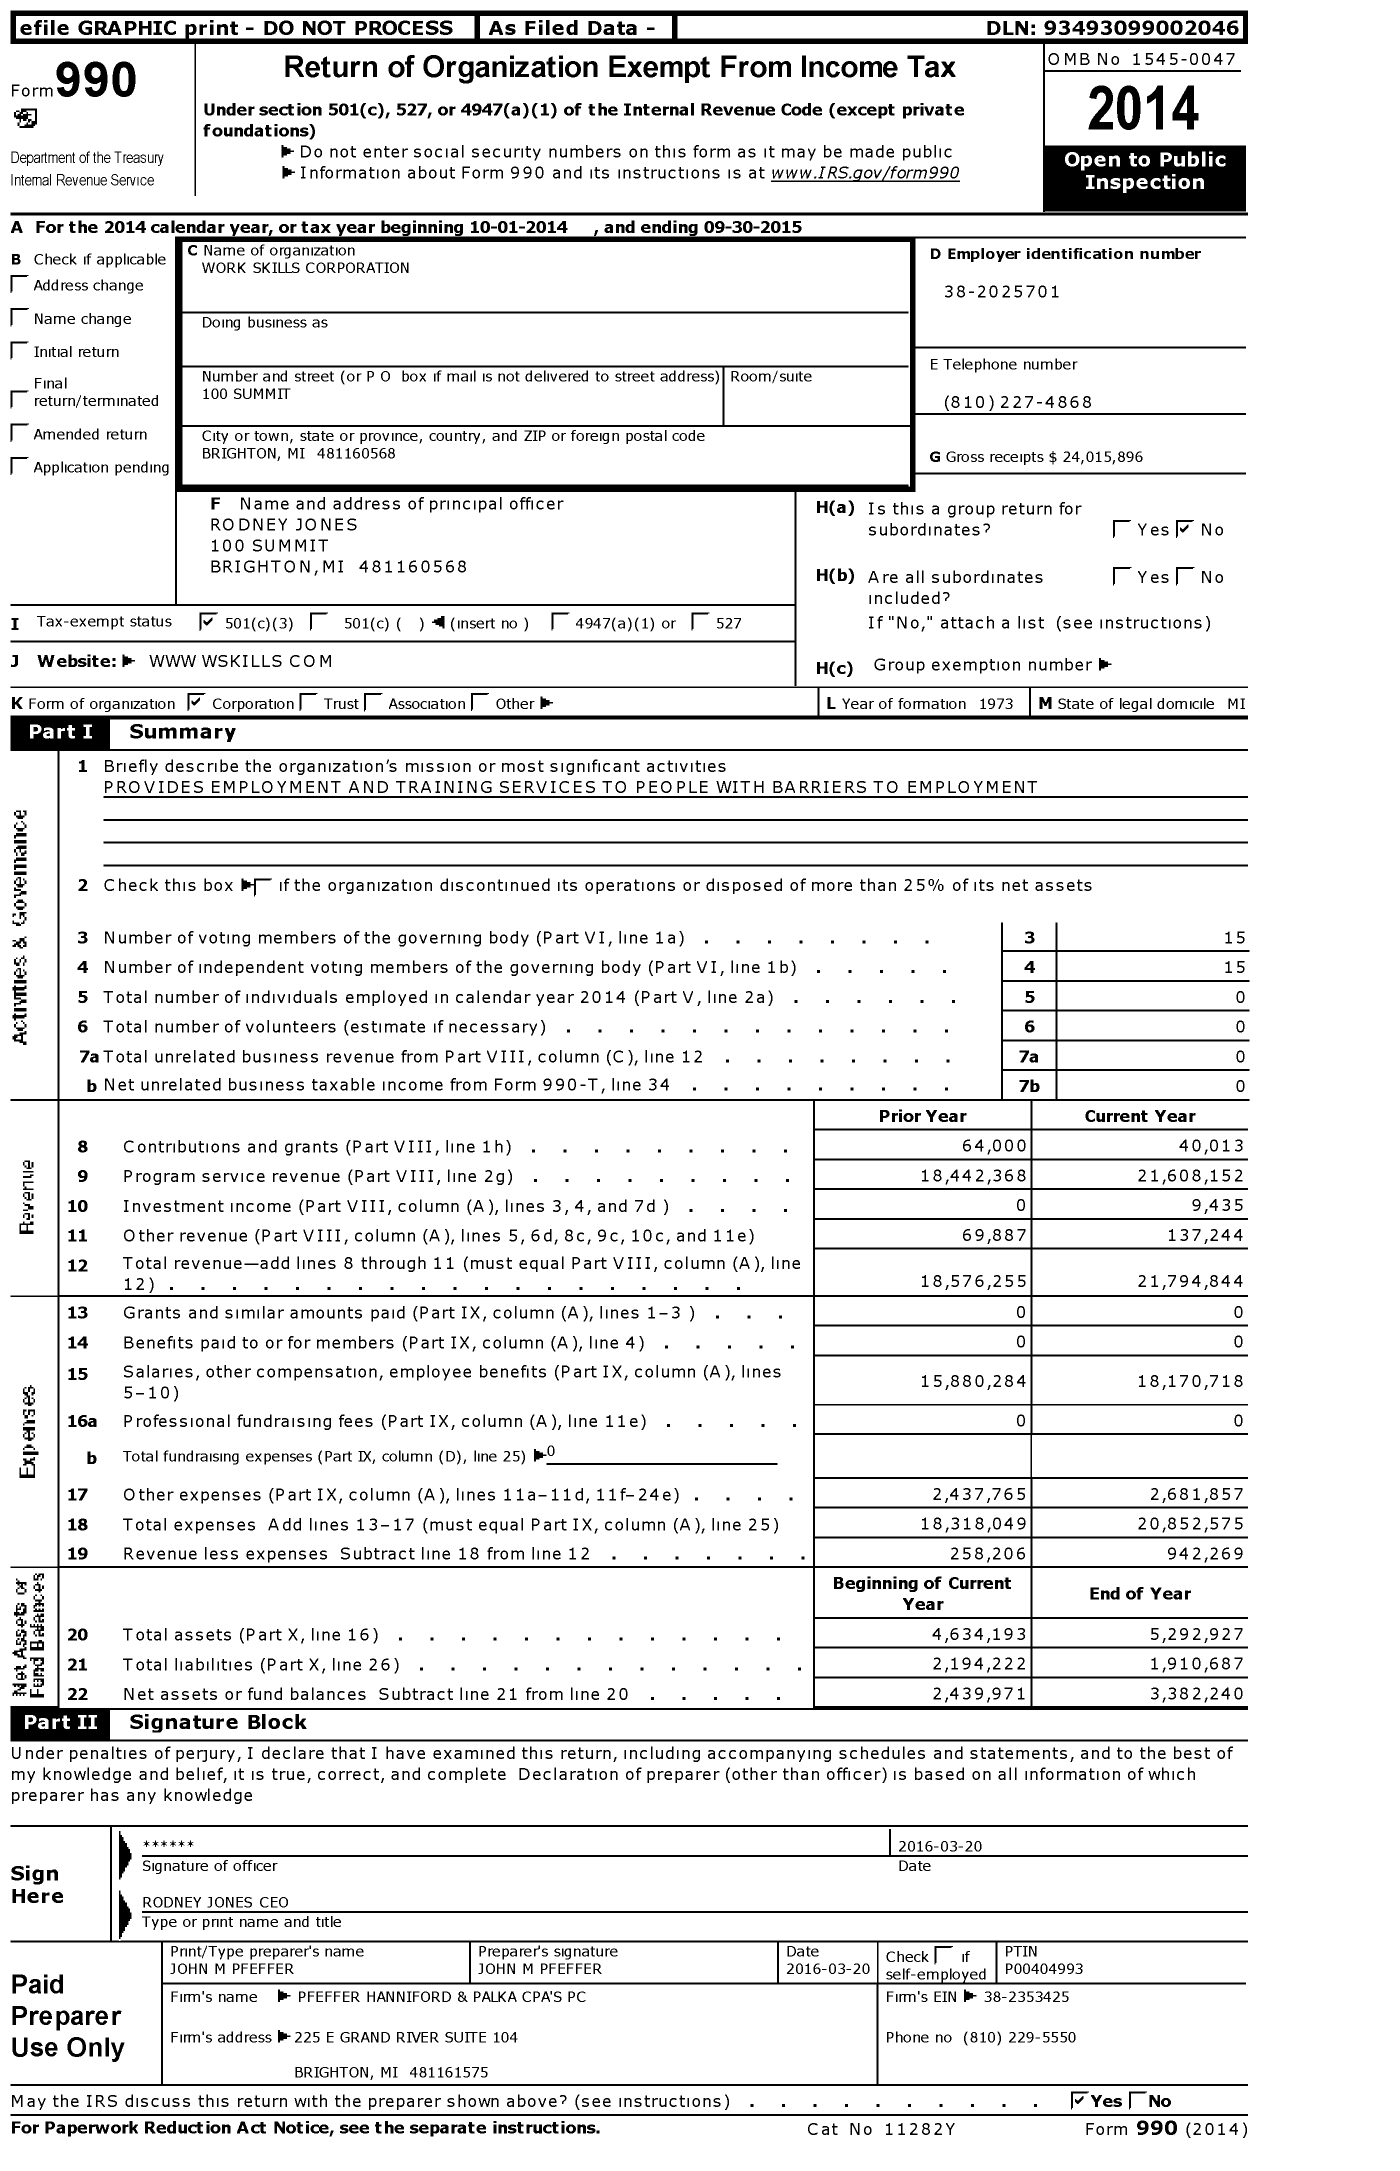 Image of first page of 2014 Form 990 for Work Skills Corporation (WSC)